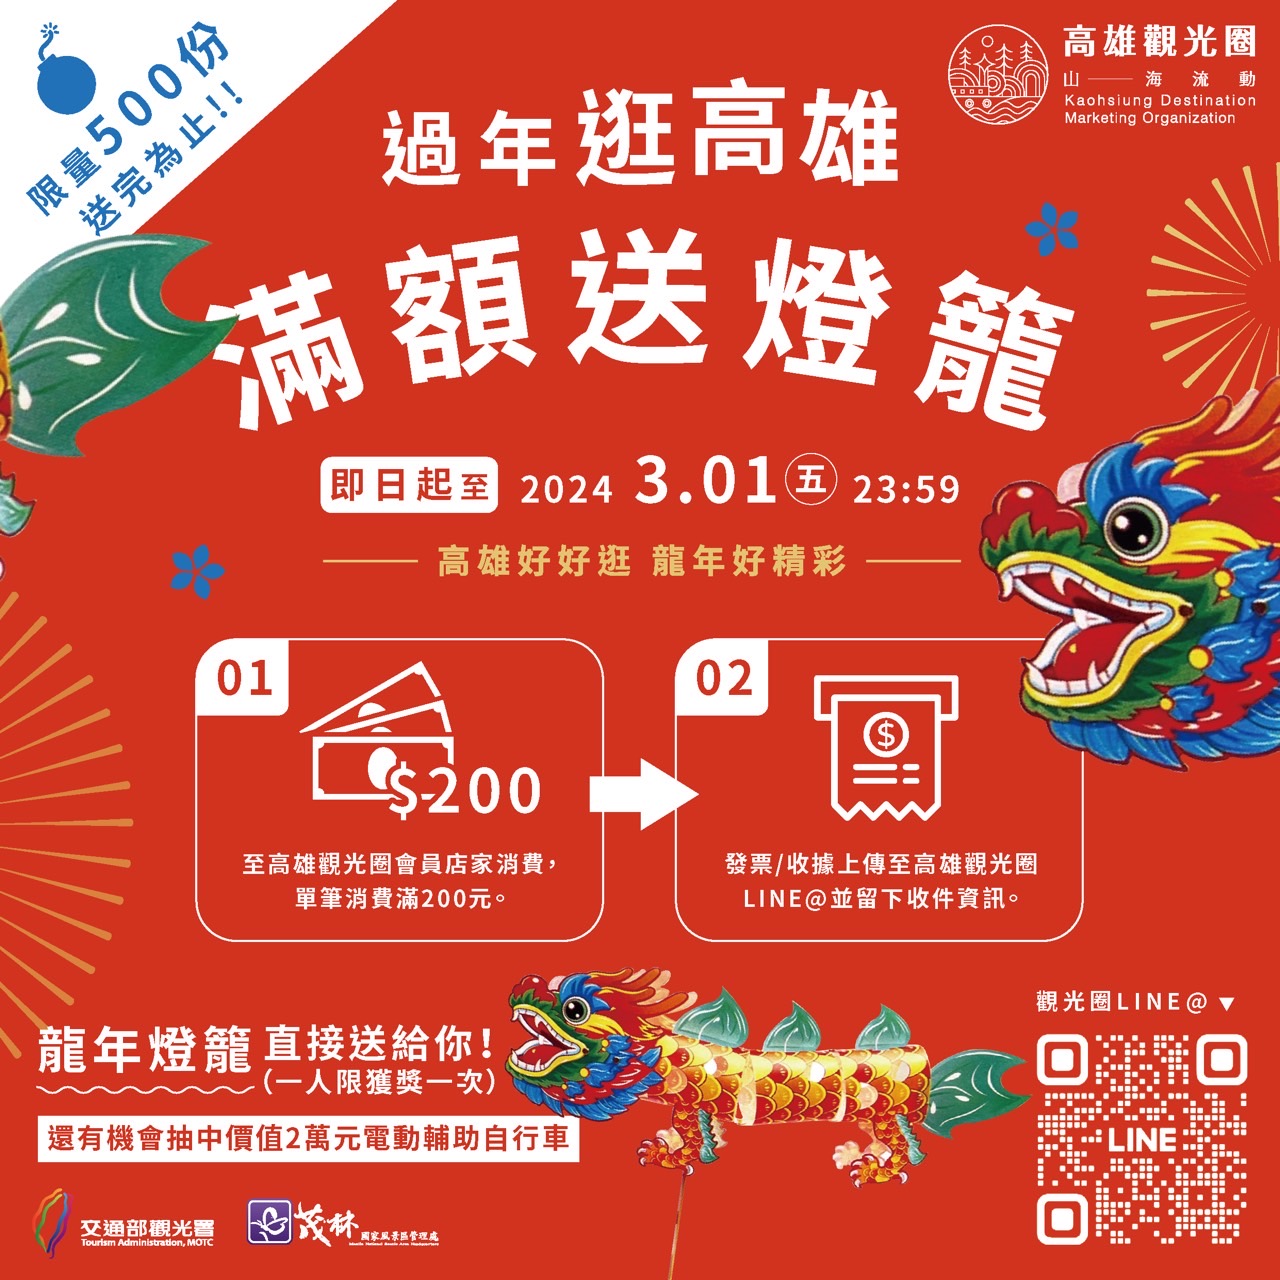 Shopping at Kaohsiung's tourist destinations to receive the Year of the Dragon Lantern, offered in limited quantity.